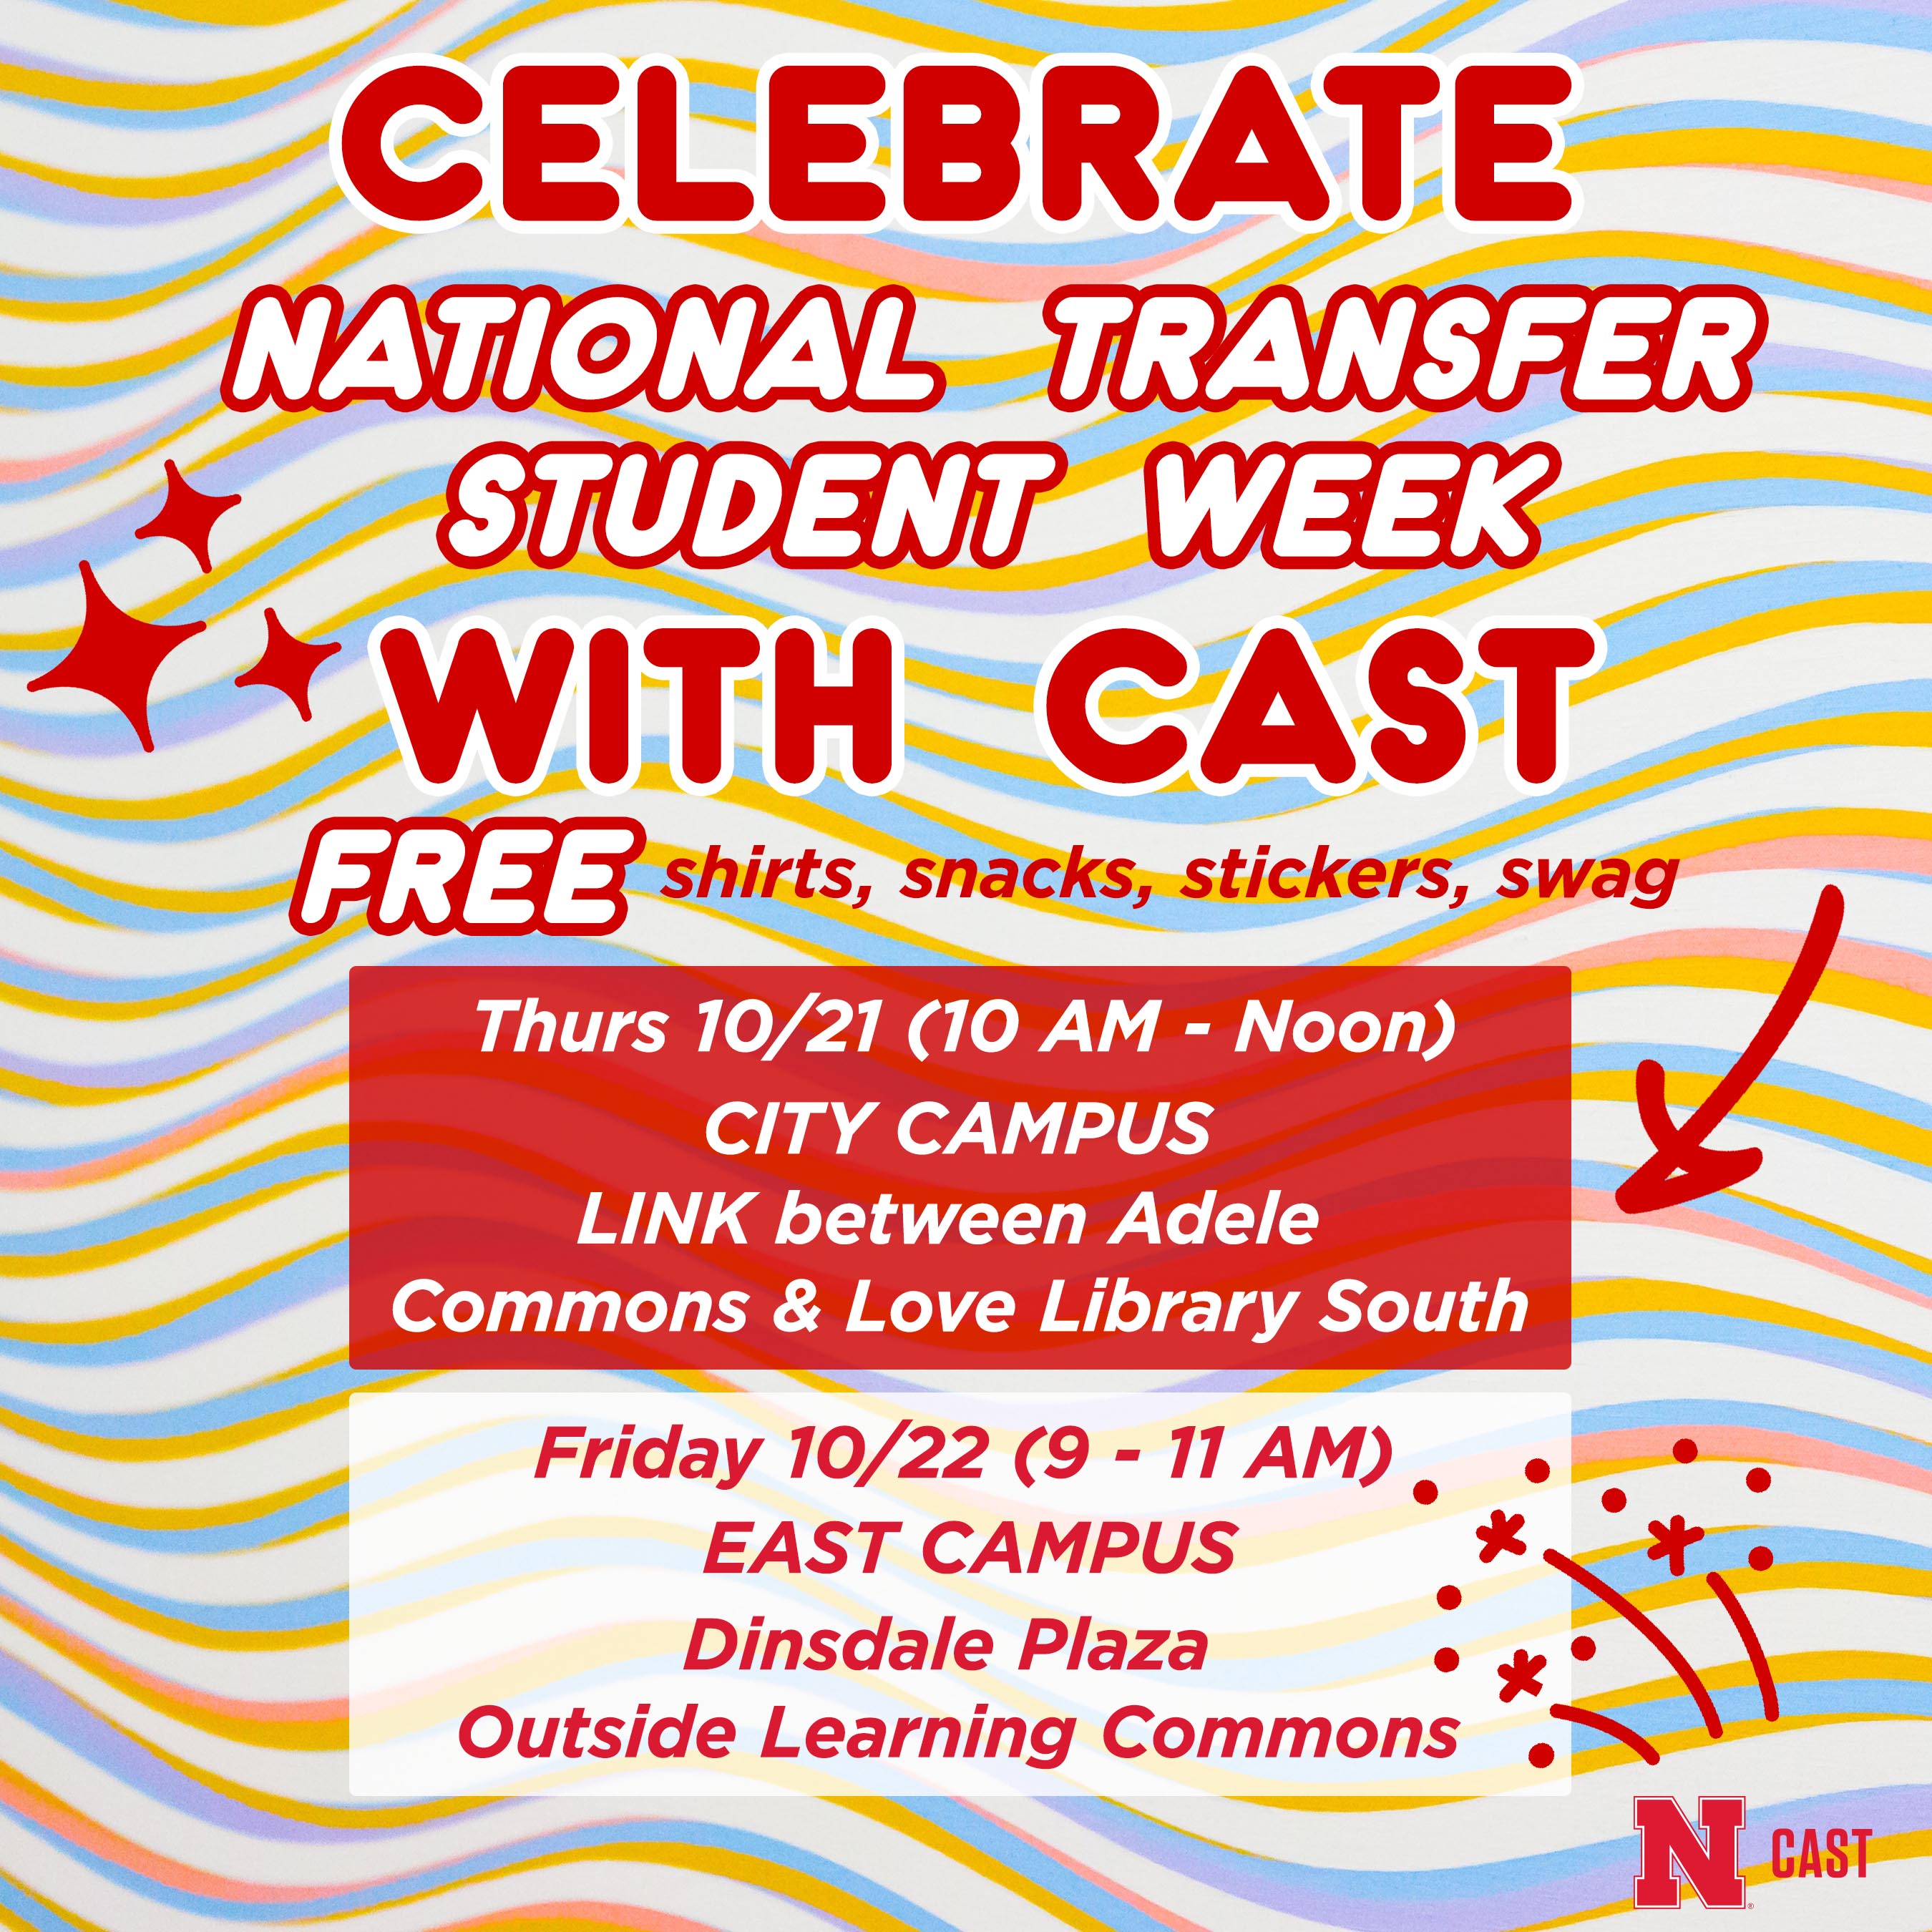 Celebrate National Transfer Student Week with CAST!